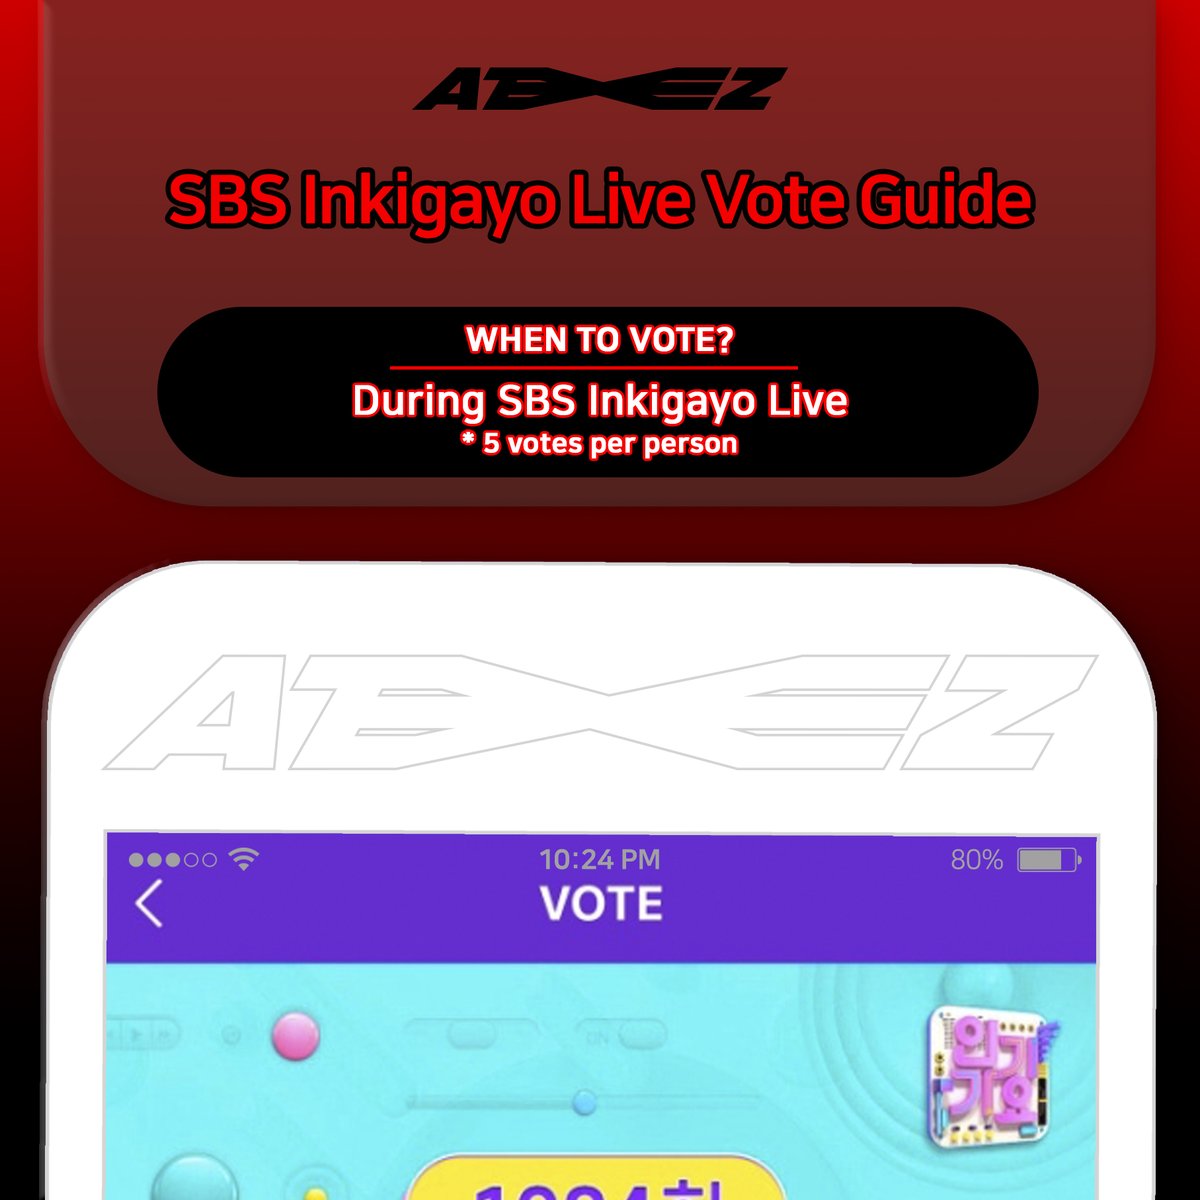 [📢] SBS Inkigayo Live Vote Guide

ATEEZ has been nominated for this week's SBS Inkigayo 🥳
Live vote is open on the STARPASS app and 5 votes will be given per person!!
Please give ATEEZ your votes ATINY🔥
⠀
#FEVER_Part_2 #불놀이야 #Fireworks #ATEEZ #에이티즈